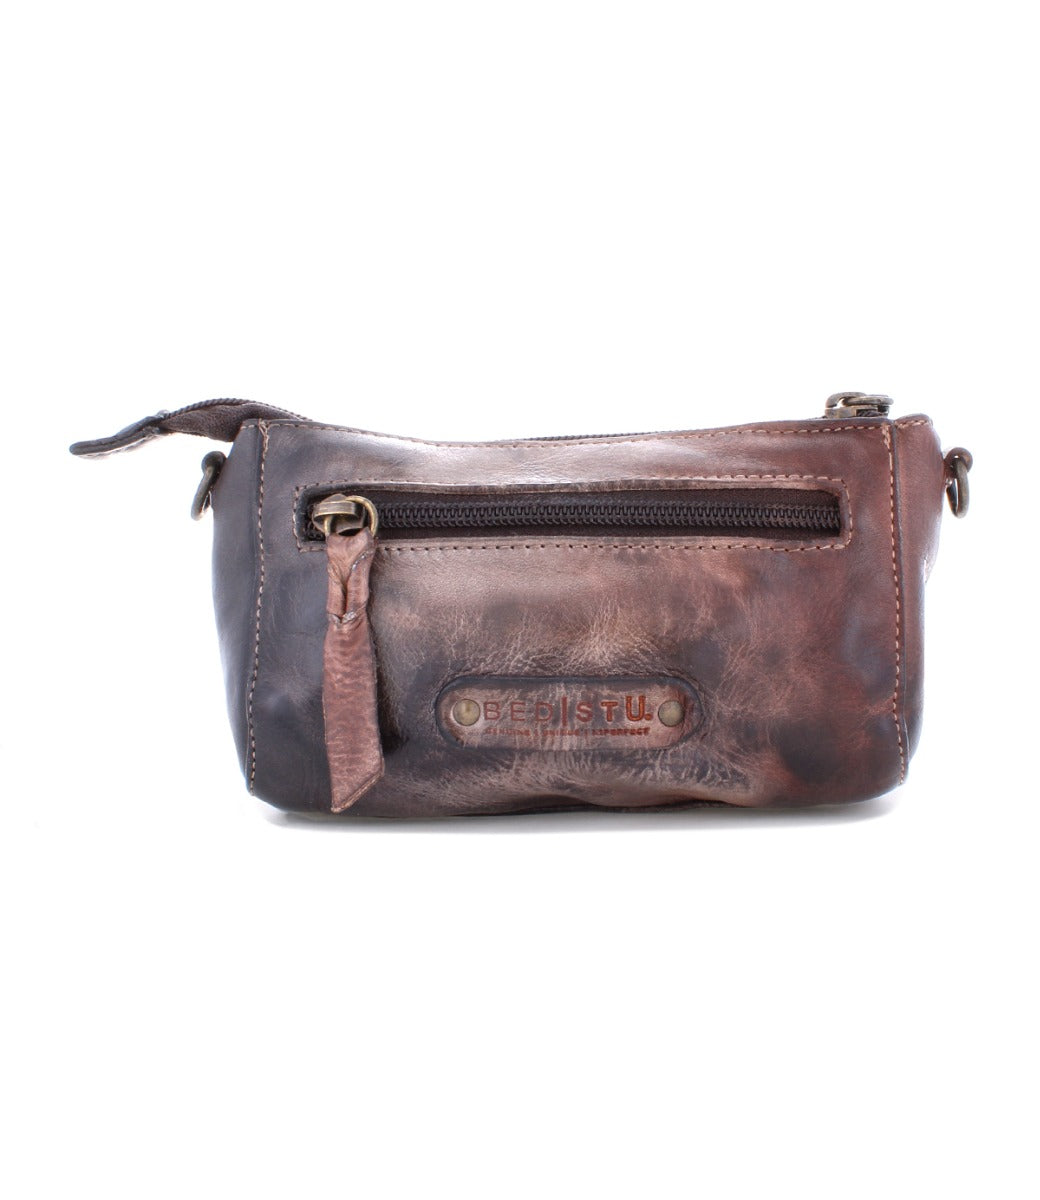 An Encase brown leather purse with a zipper by Bed Stu.